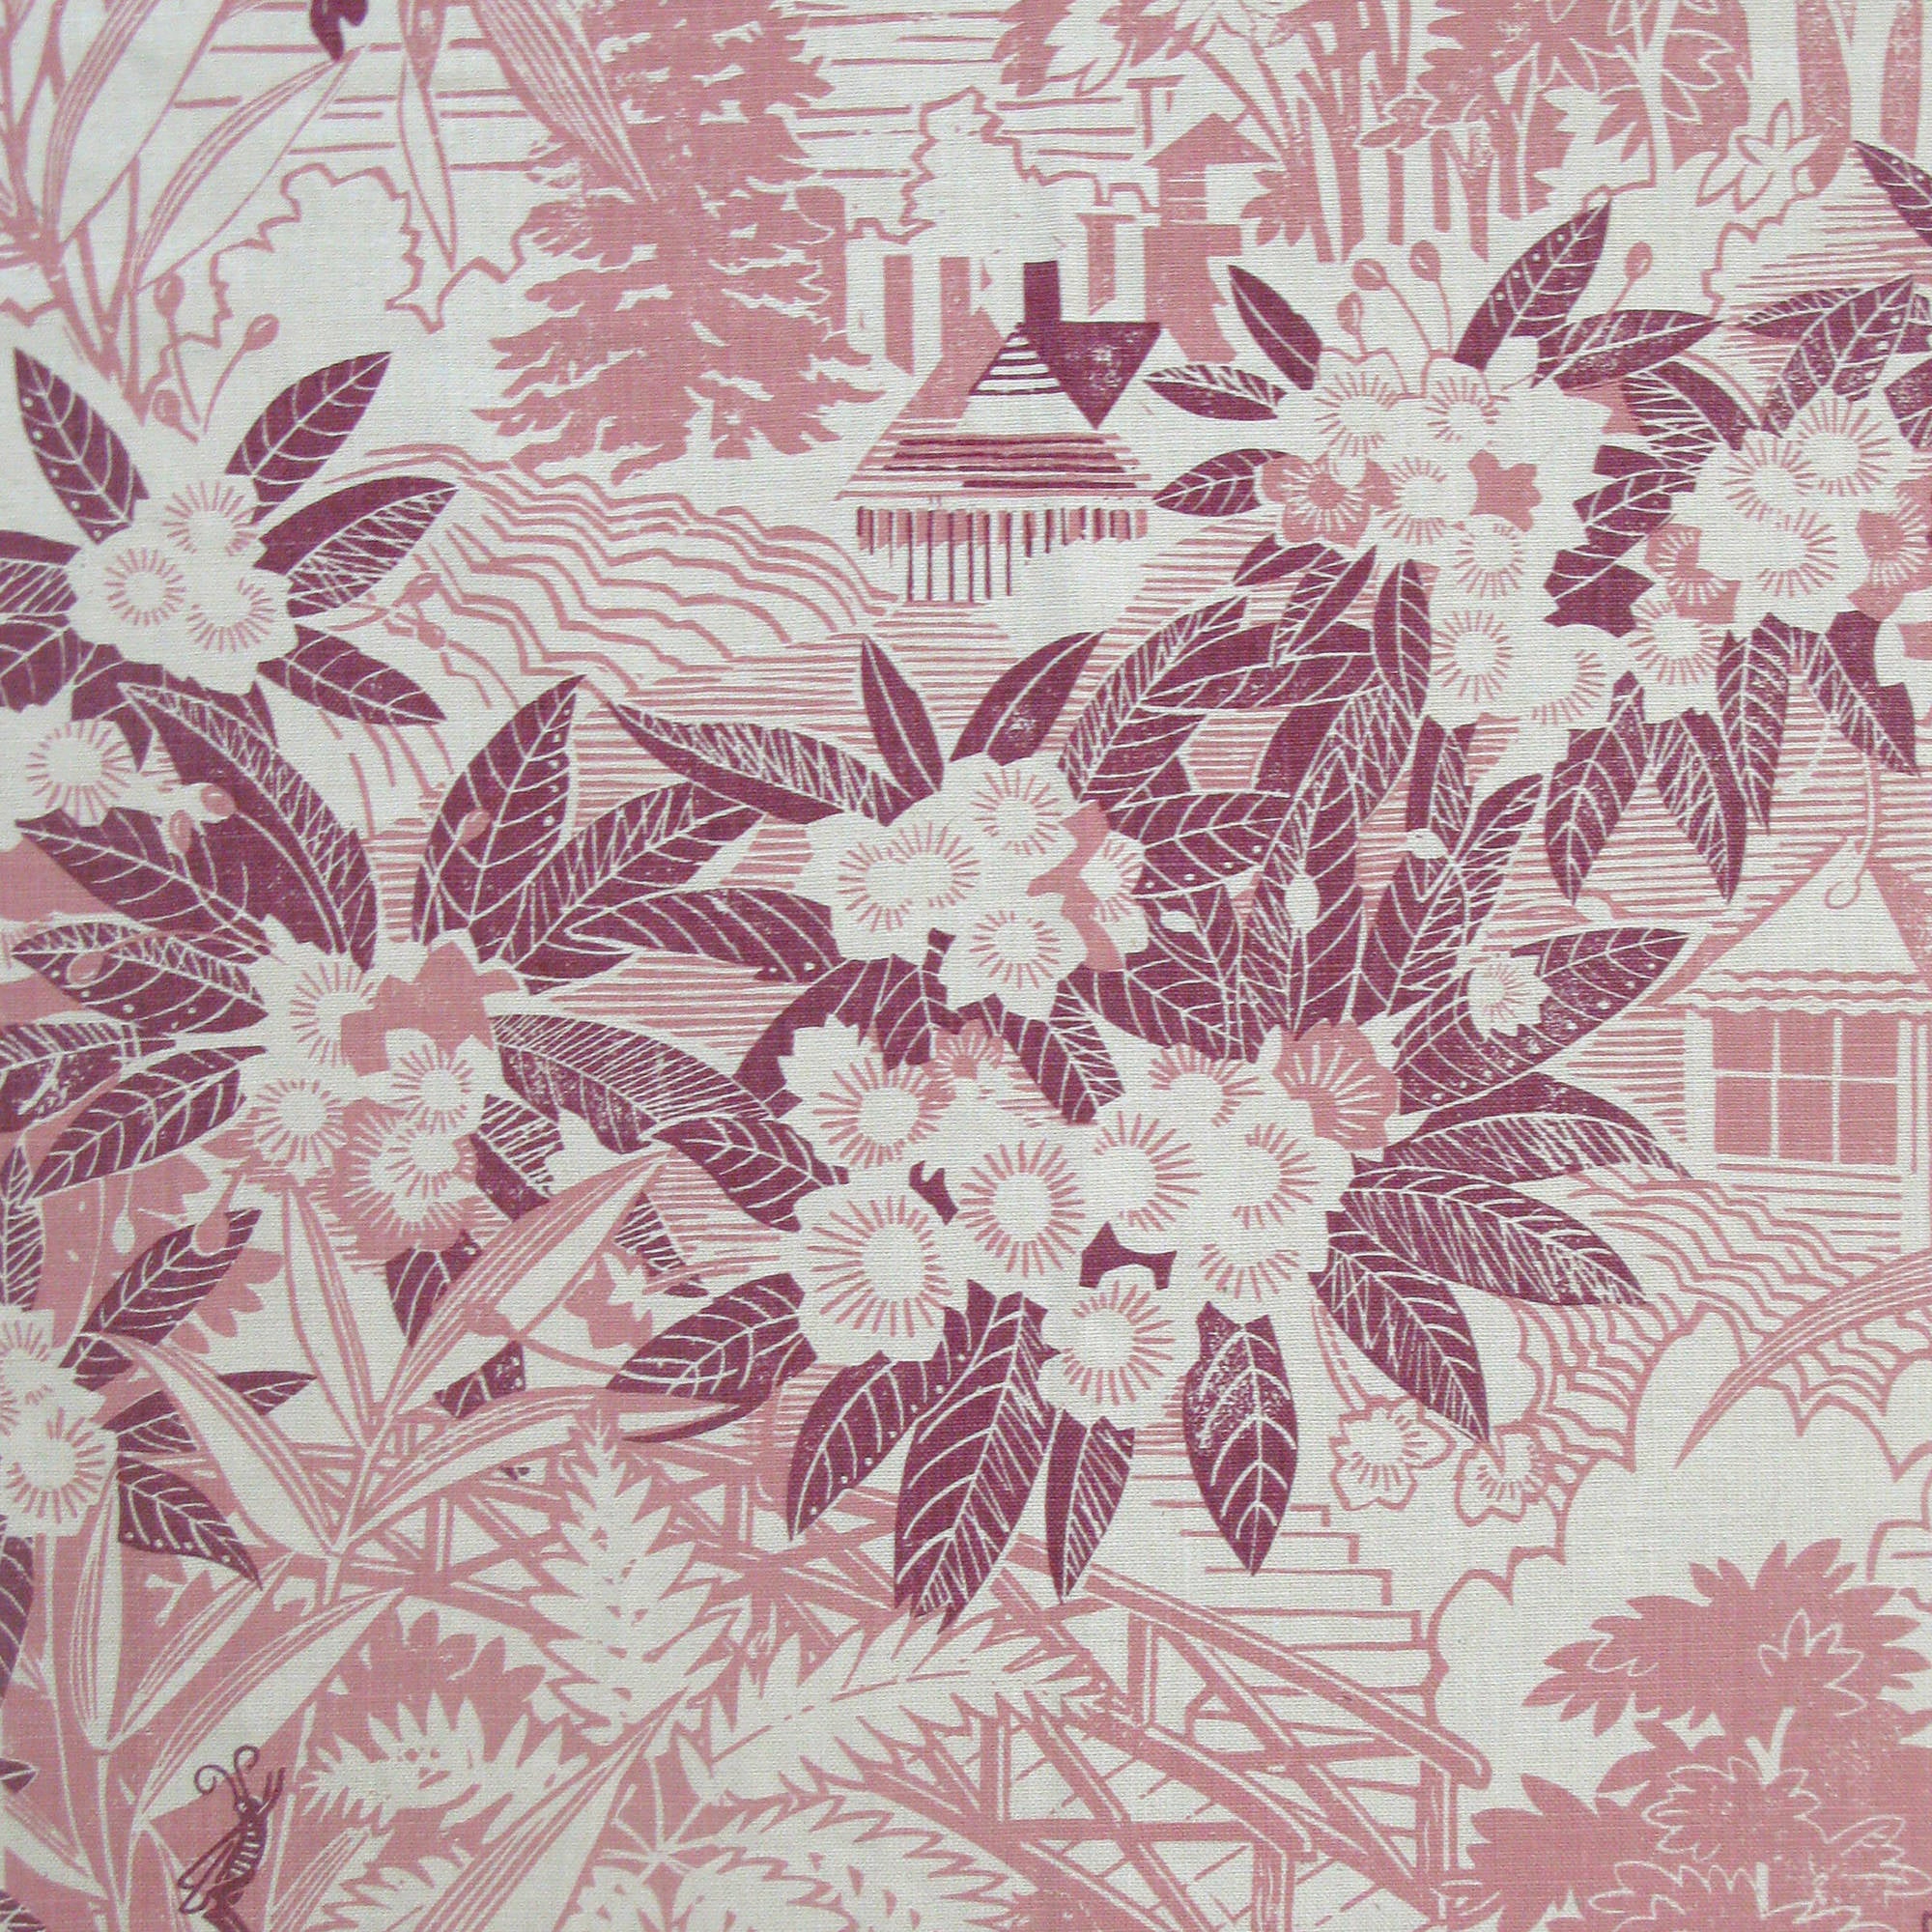 Detail of fabric in an intricate botanical, bridge and house print in pink and maroon on a cream field.